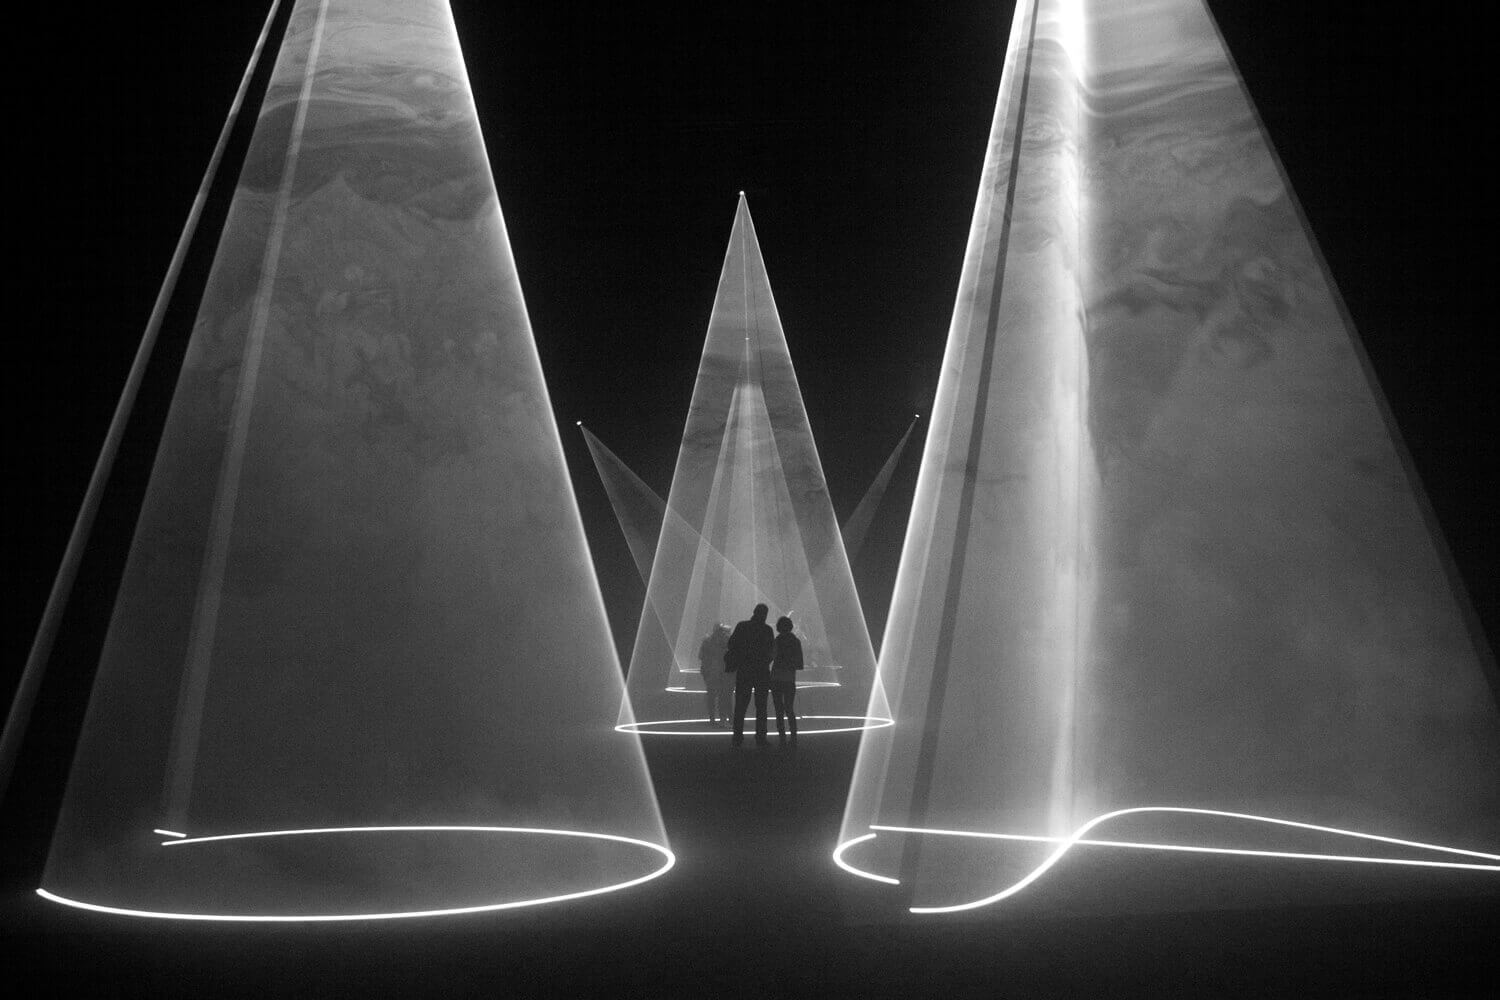 Solid Light by Anthony McCall